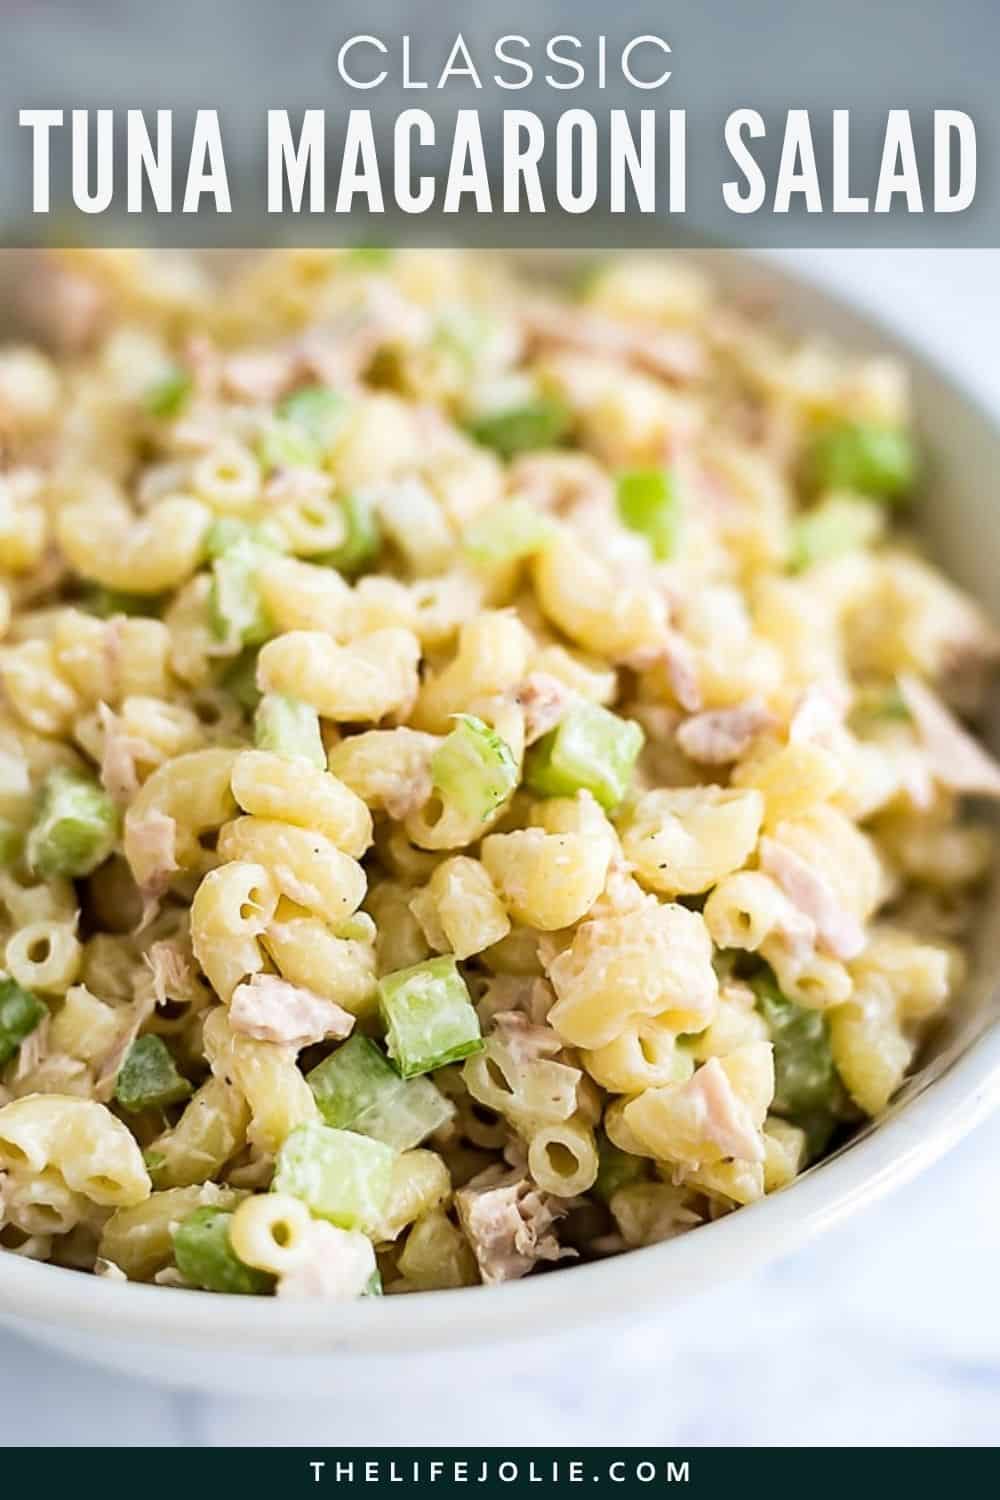 A close up image of a bowl zooming in on the details of tuna macaroni salad.